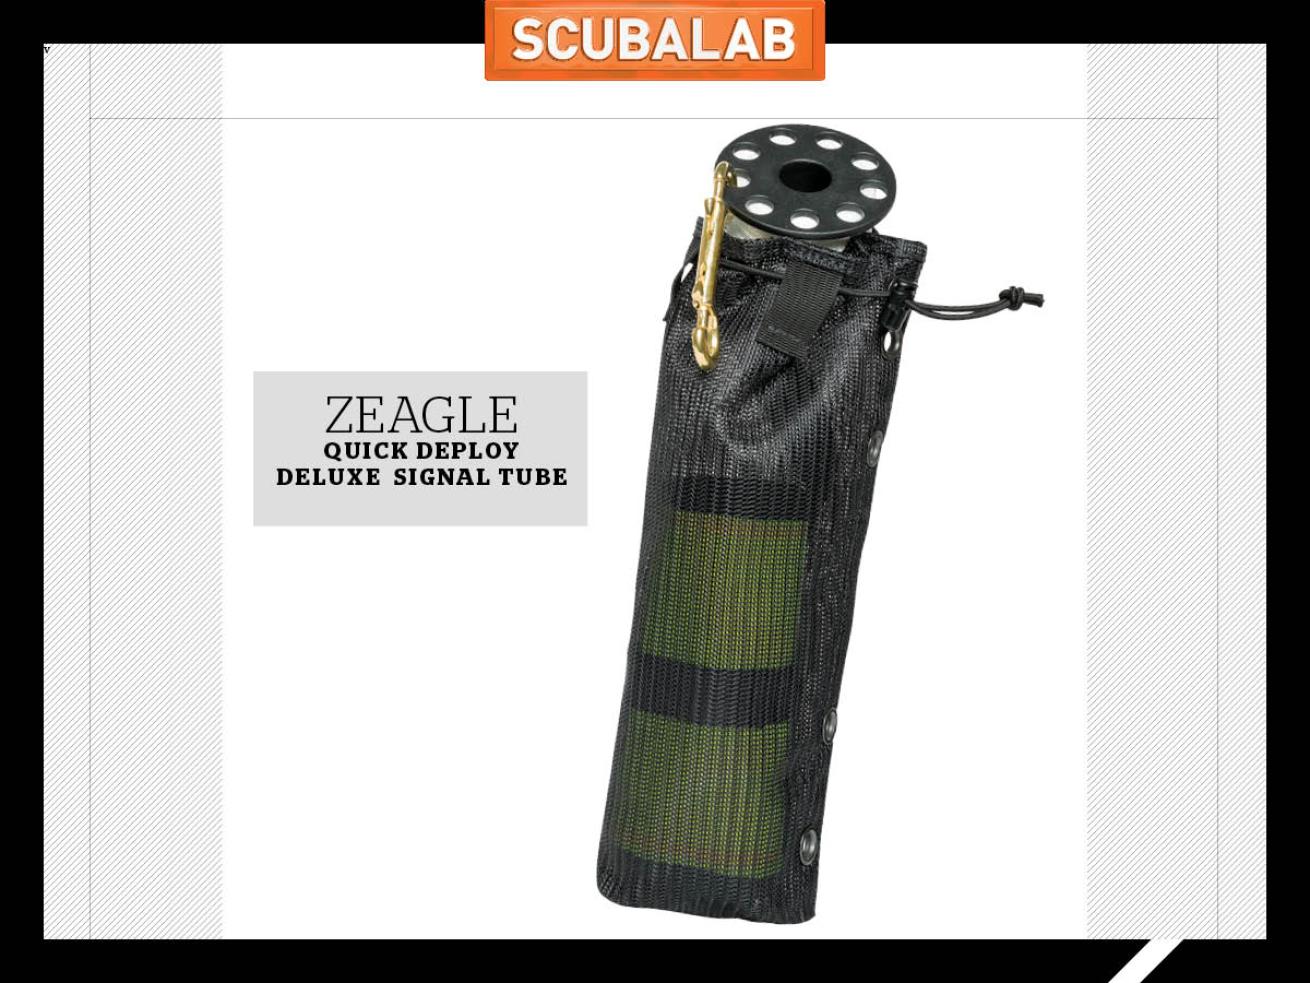 Zeagle Quick Deploy Signal Tube solo diving safety gear.